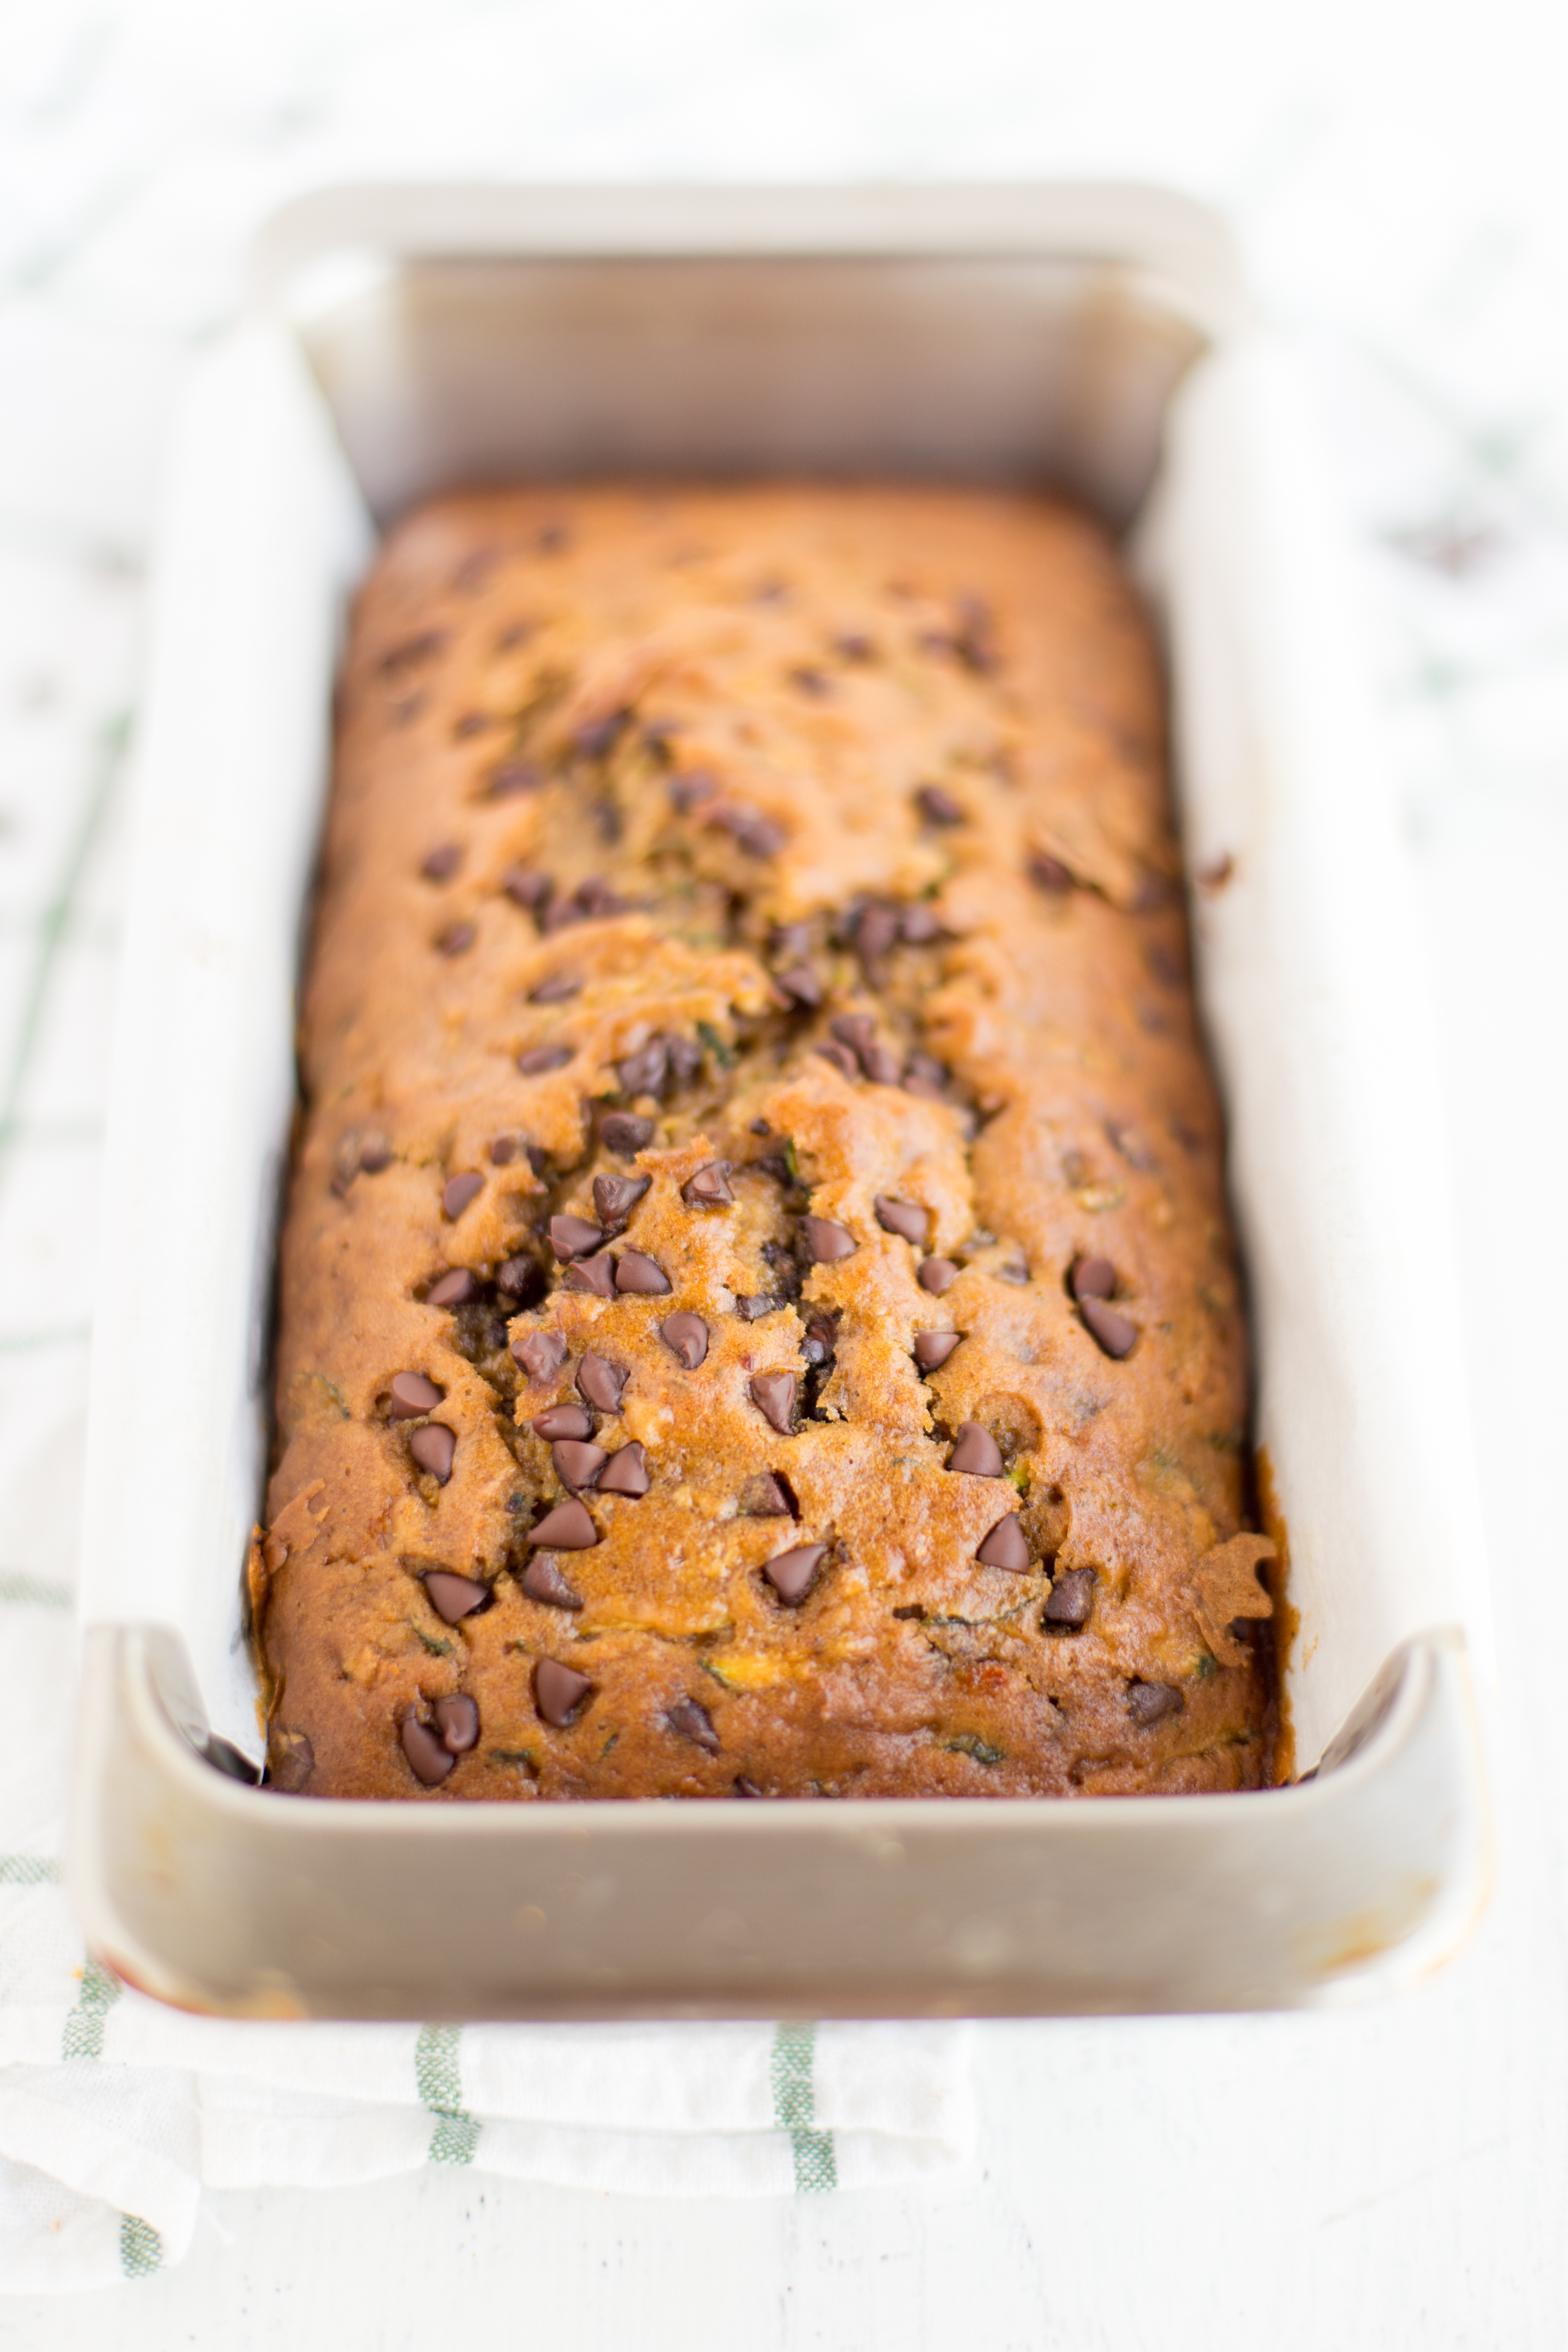 Chocolate Chip Zucchini Bread baked in pan